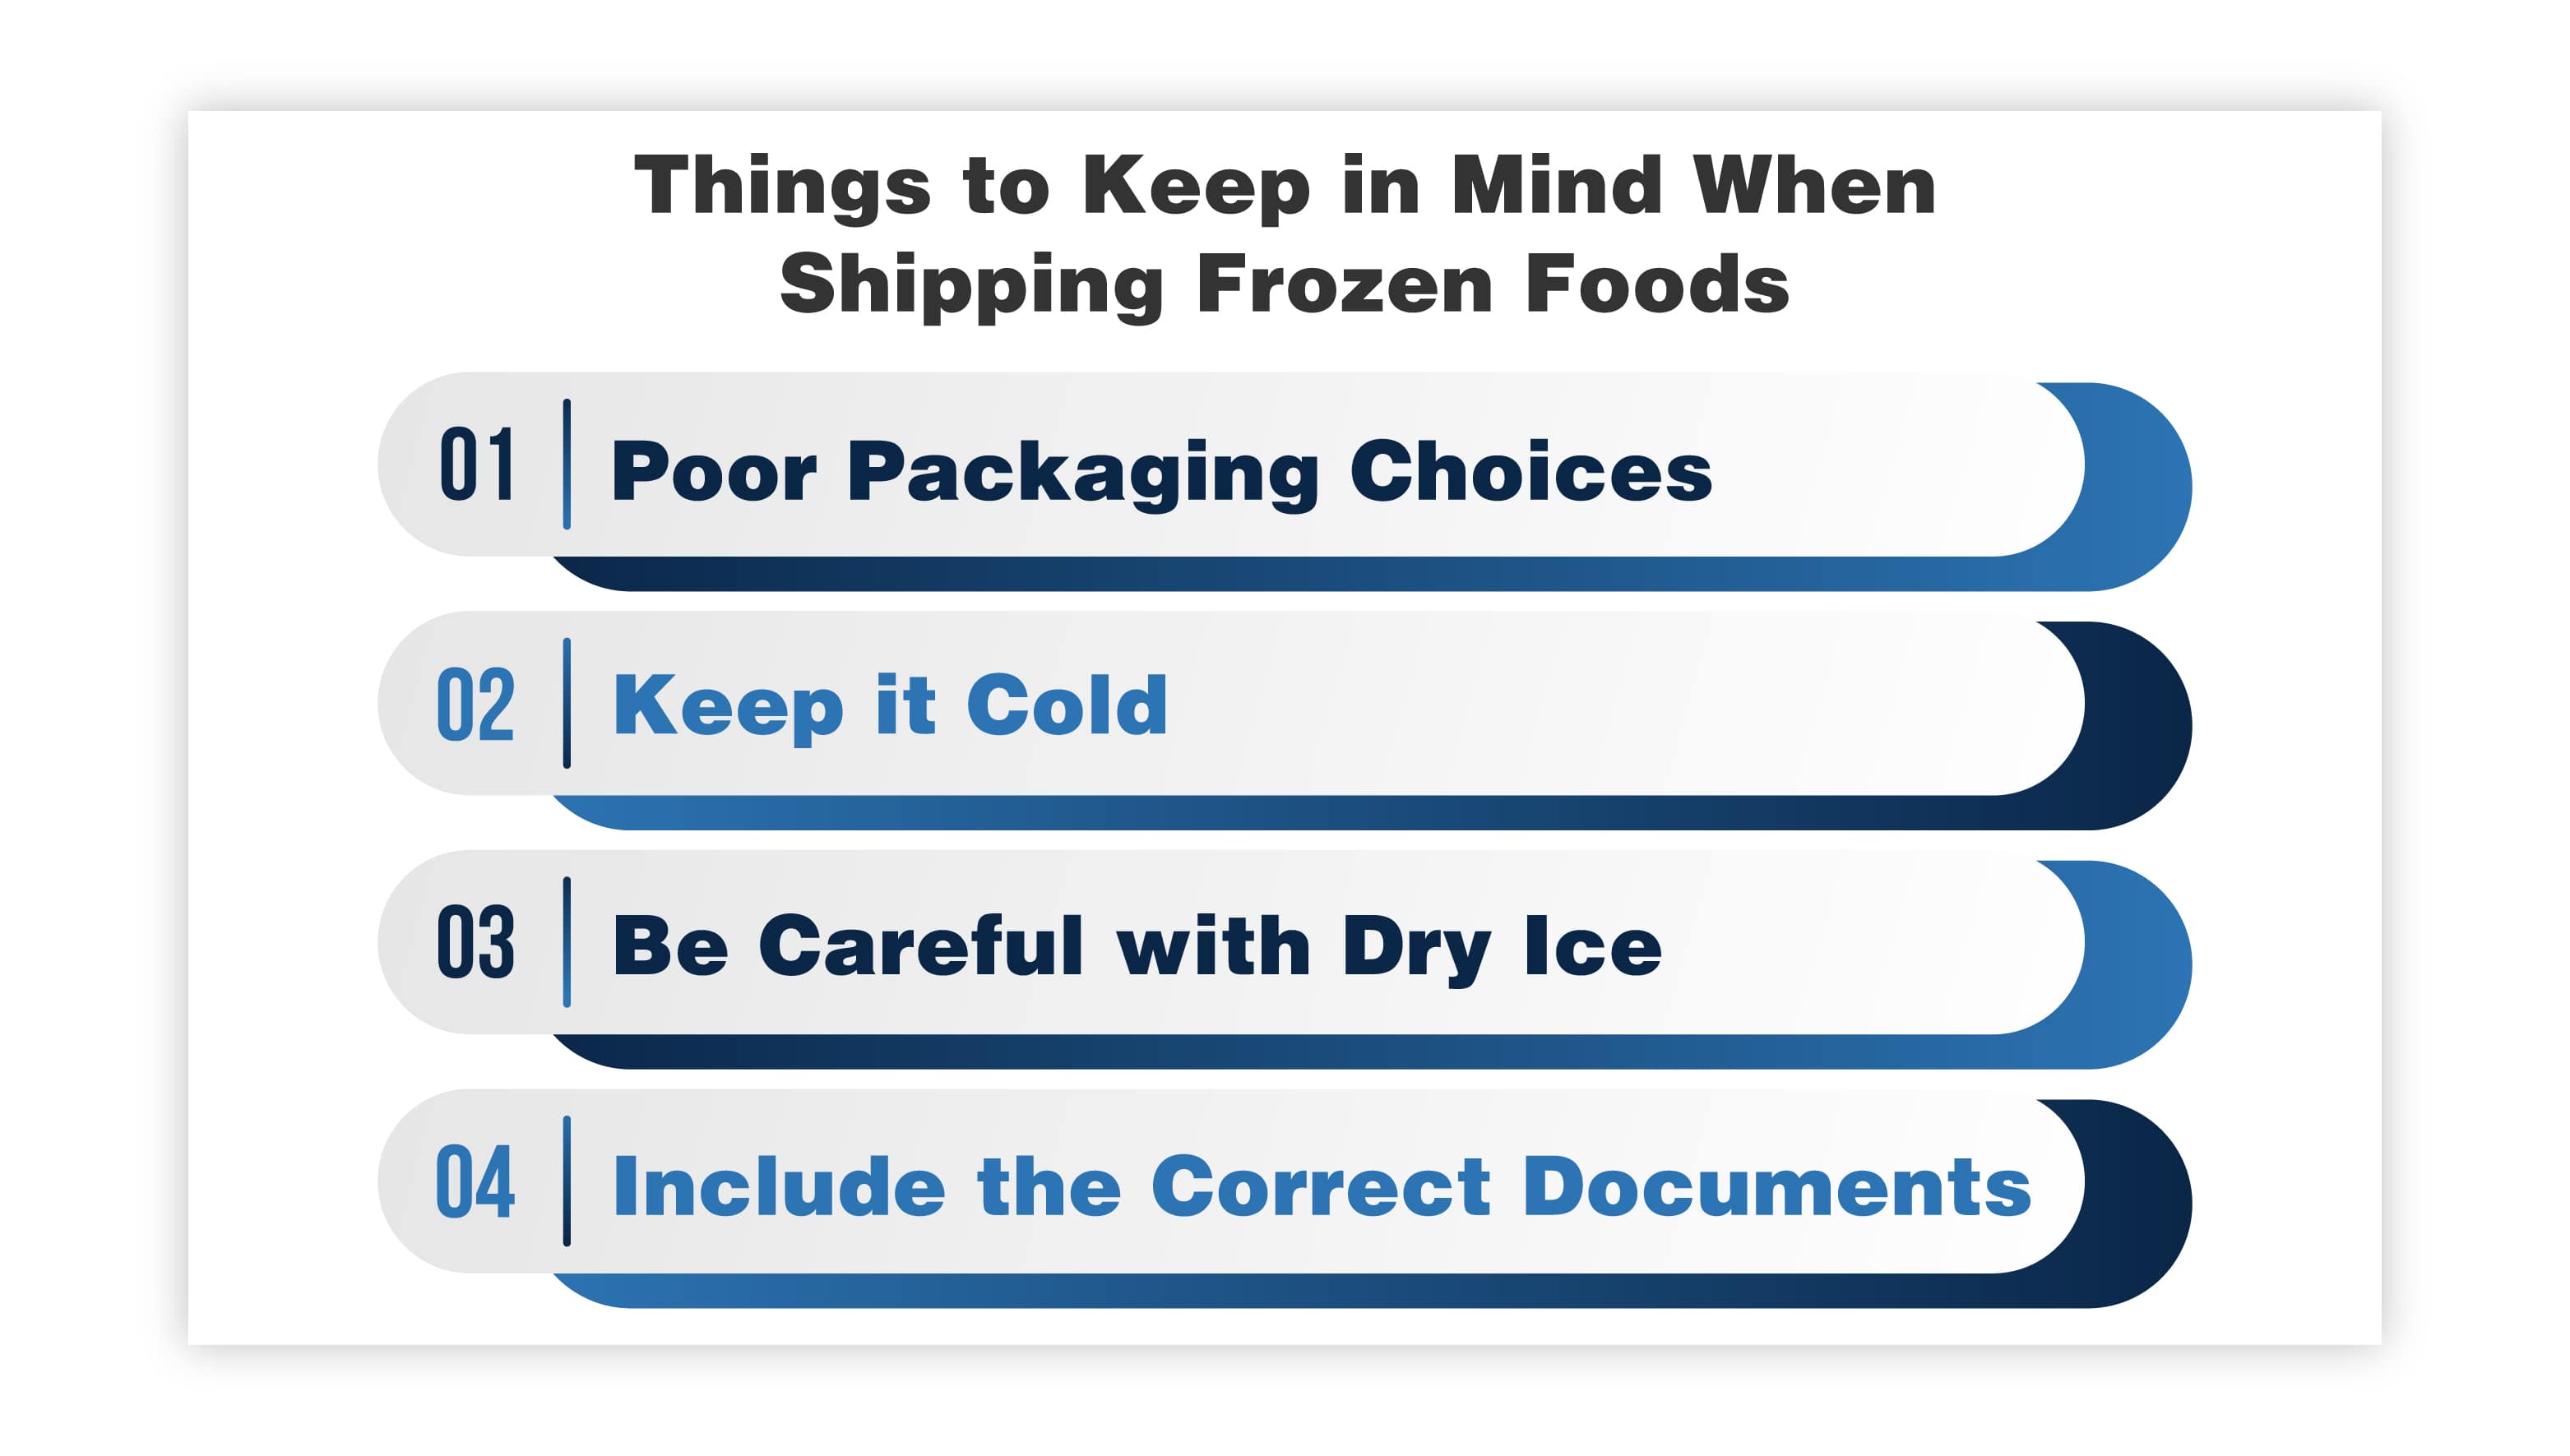 What Are Some Things to Keep in Mind When Shipping Frozen Foods?